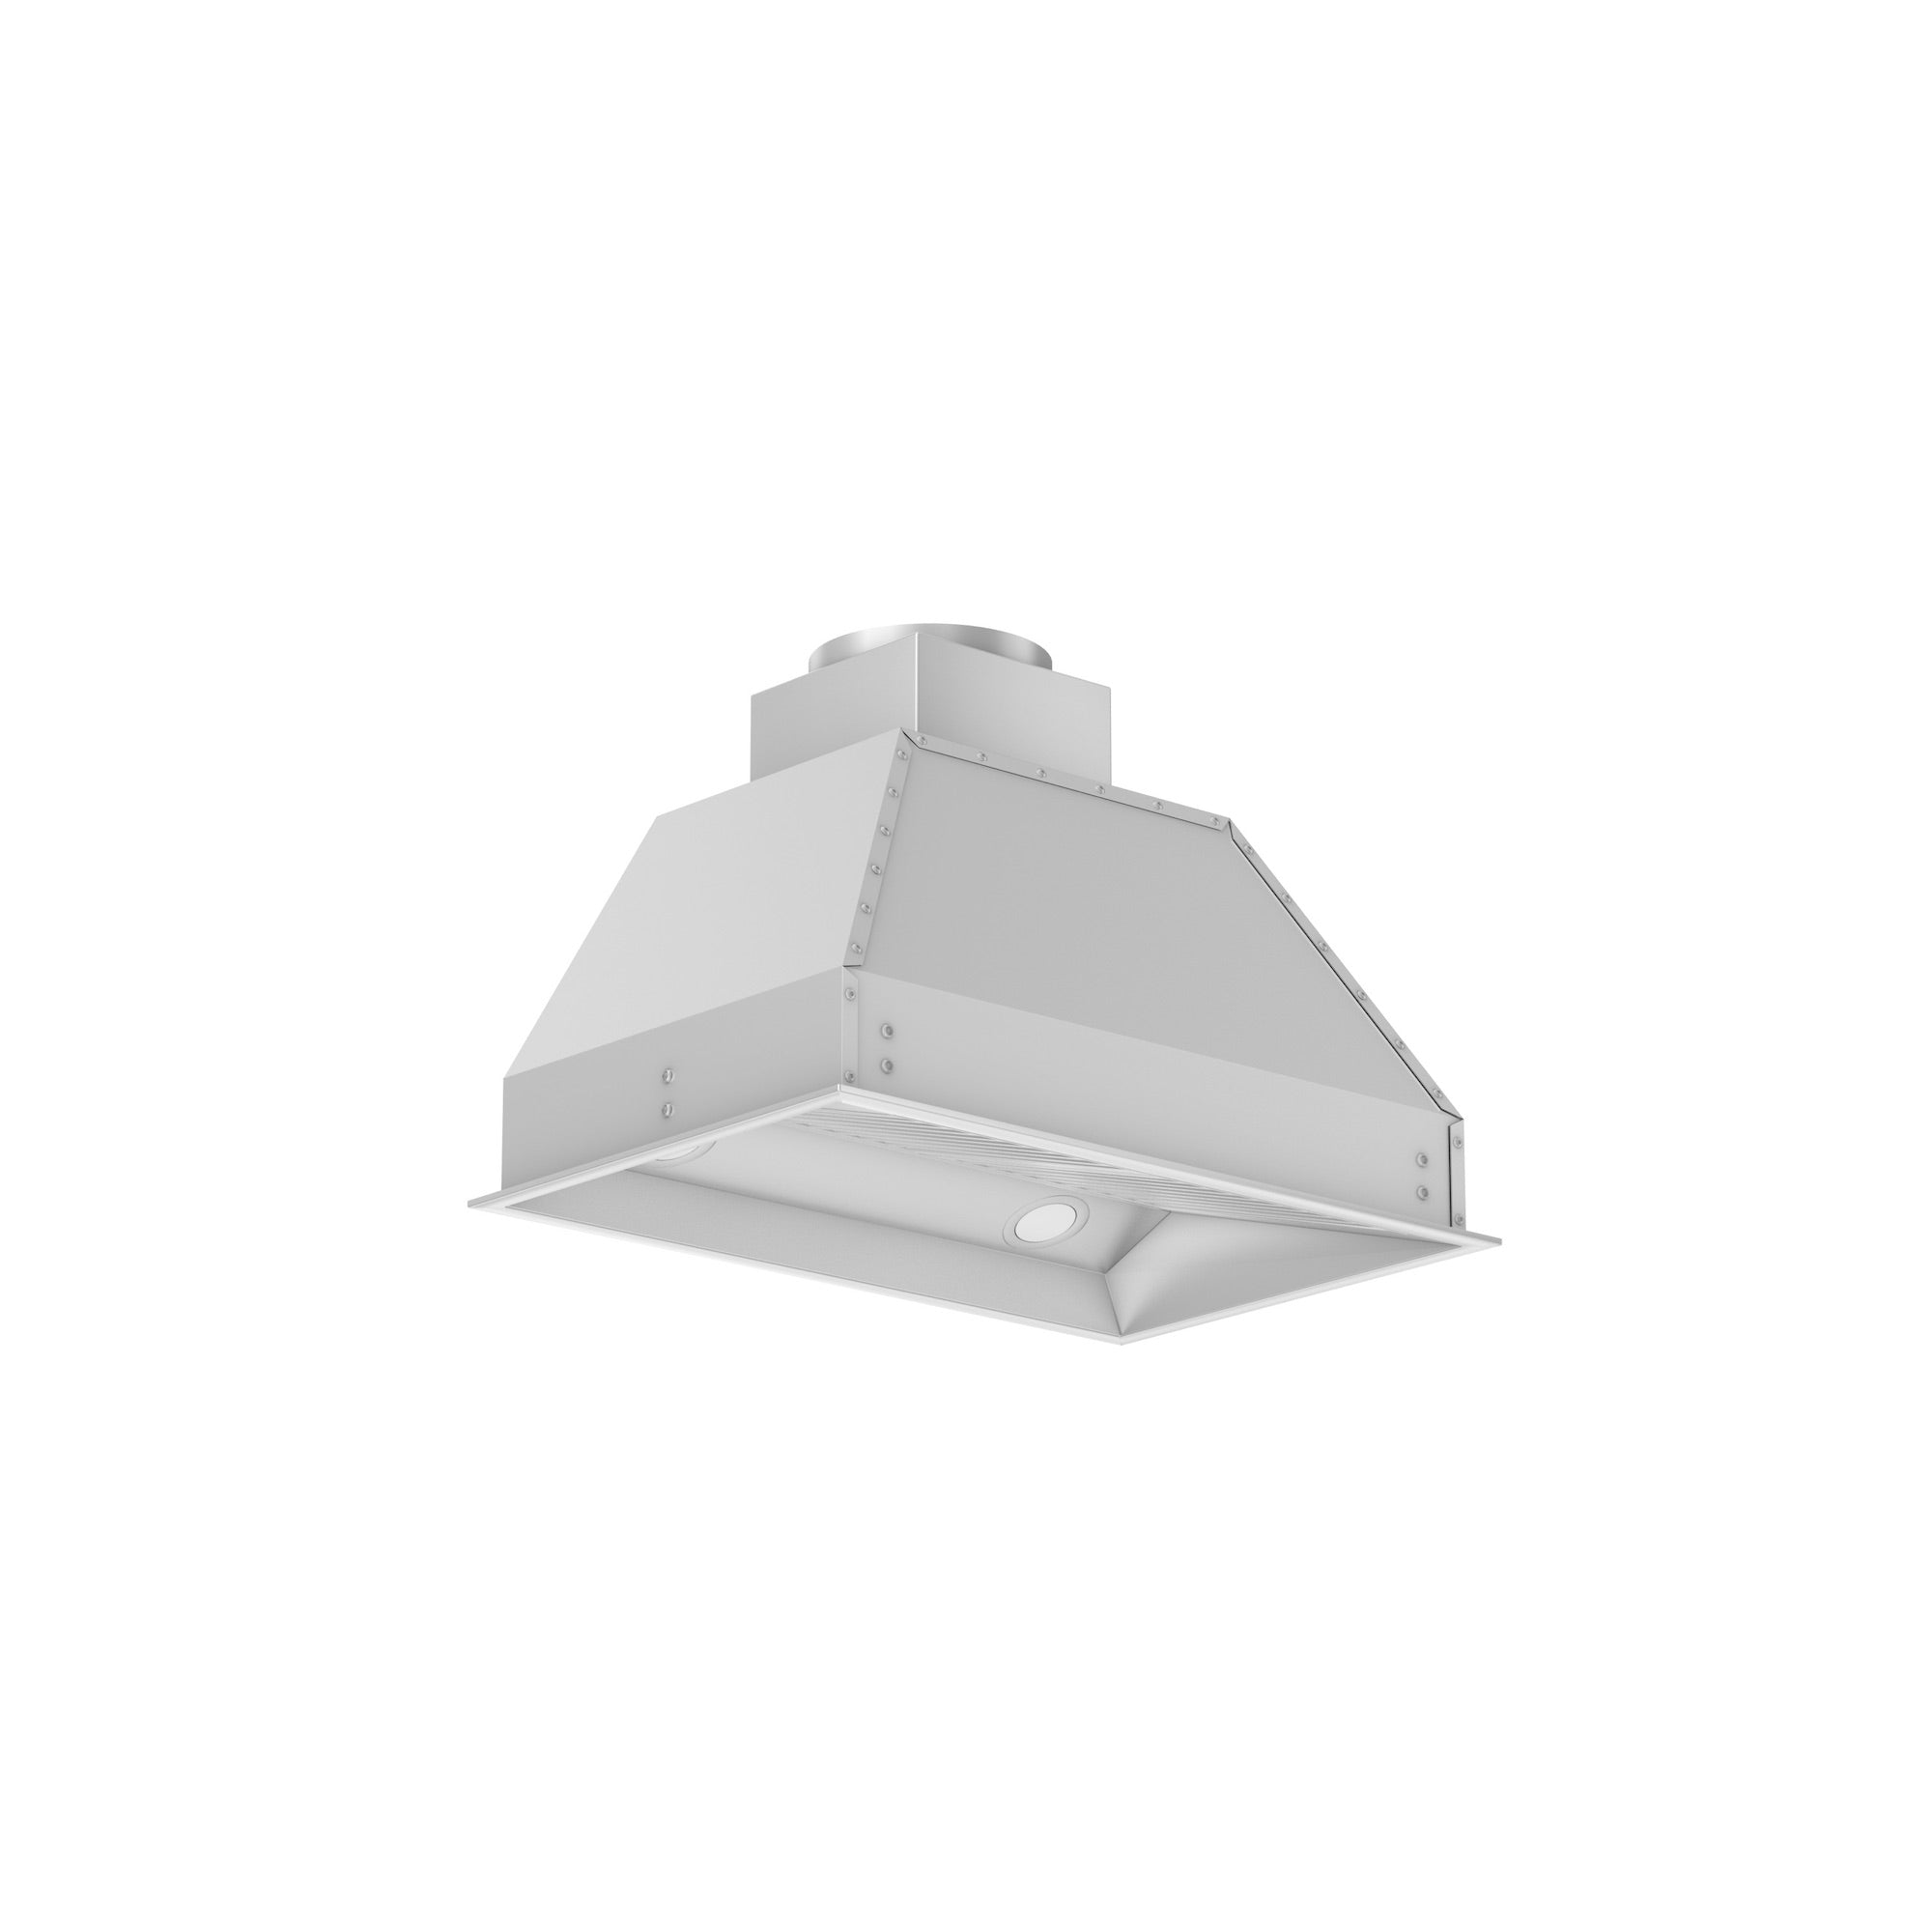 ZLINE 34" Ducted Remote Blower Range Hood Insert in Stainless Steel (698-RS-34-400)